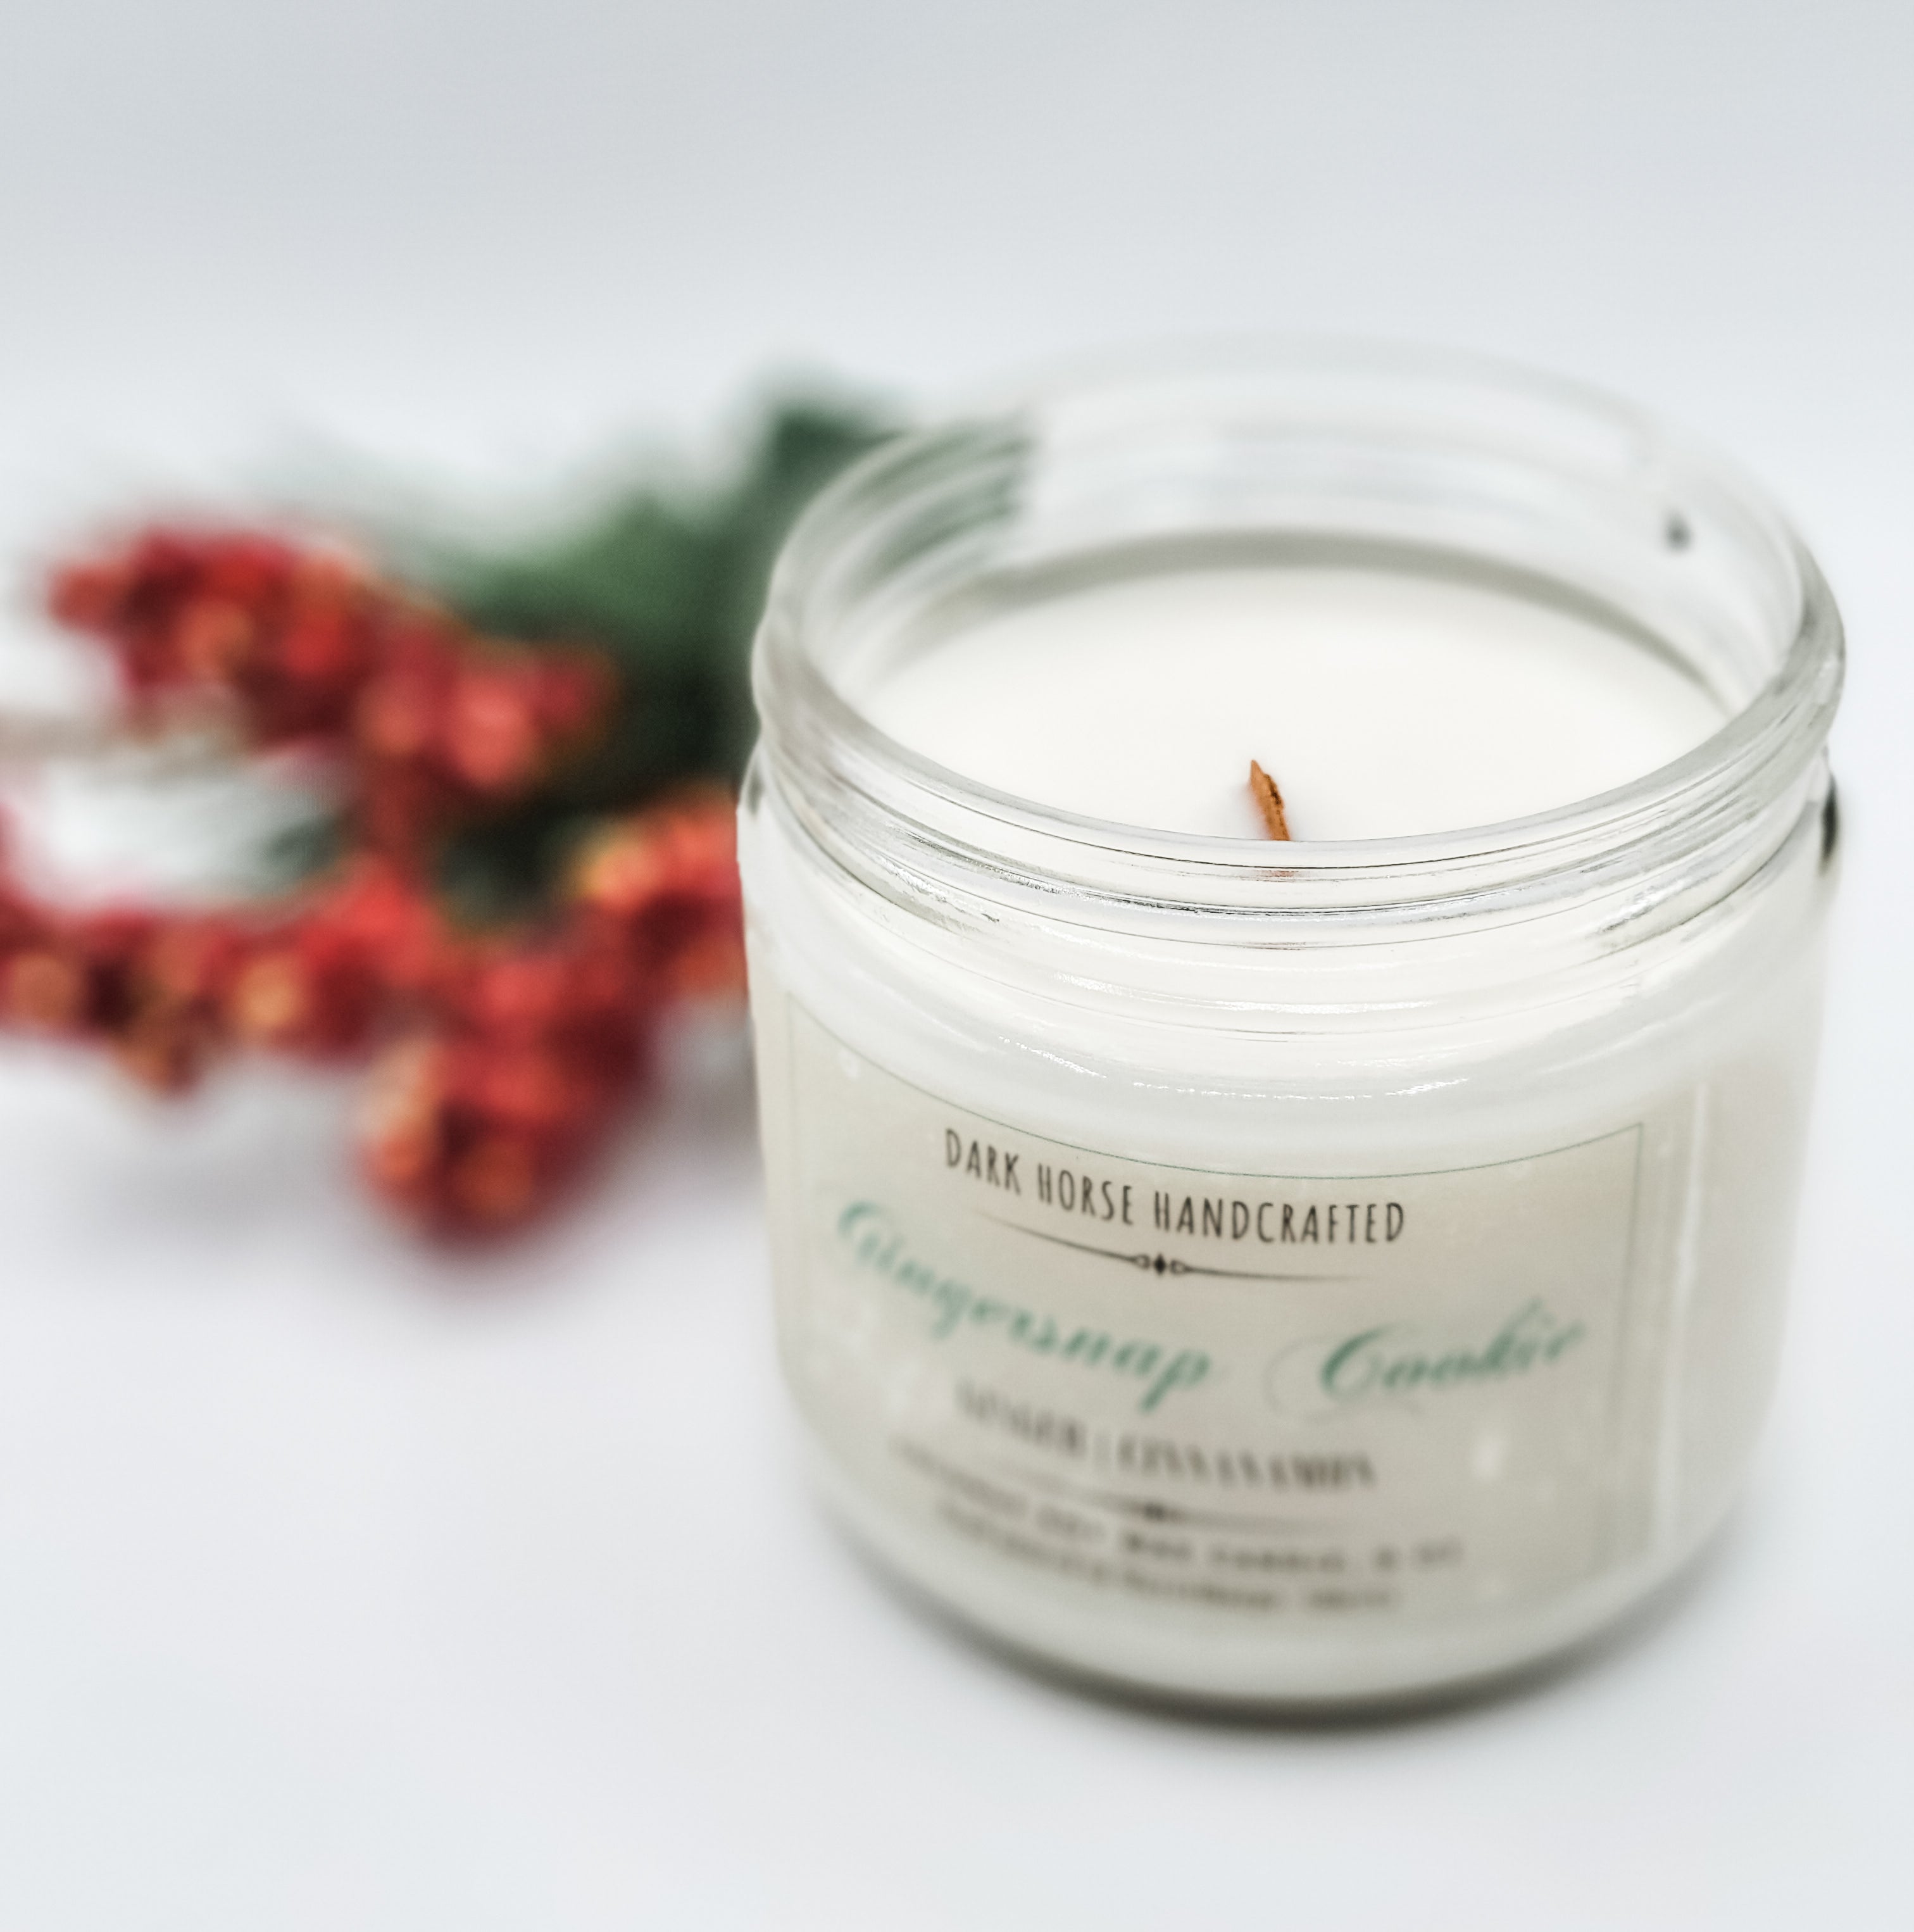 Gingersnap Cookie - Soy Candle